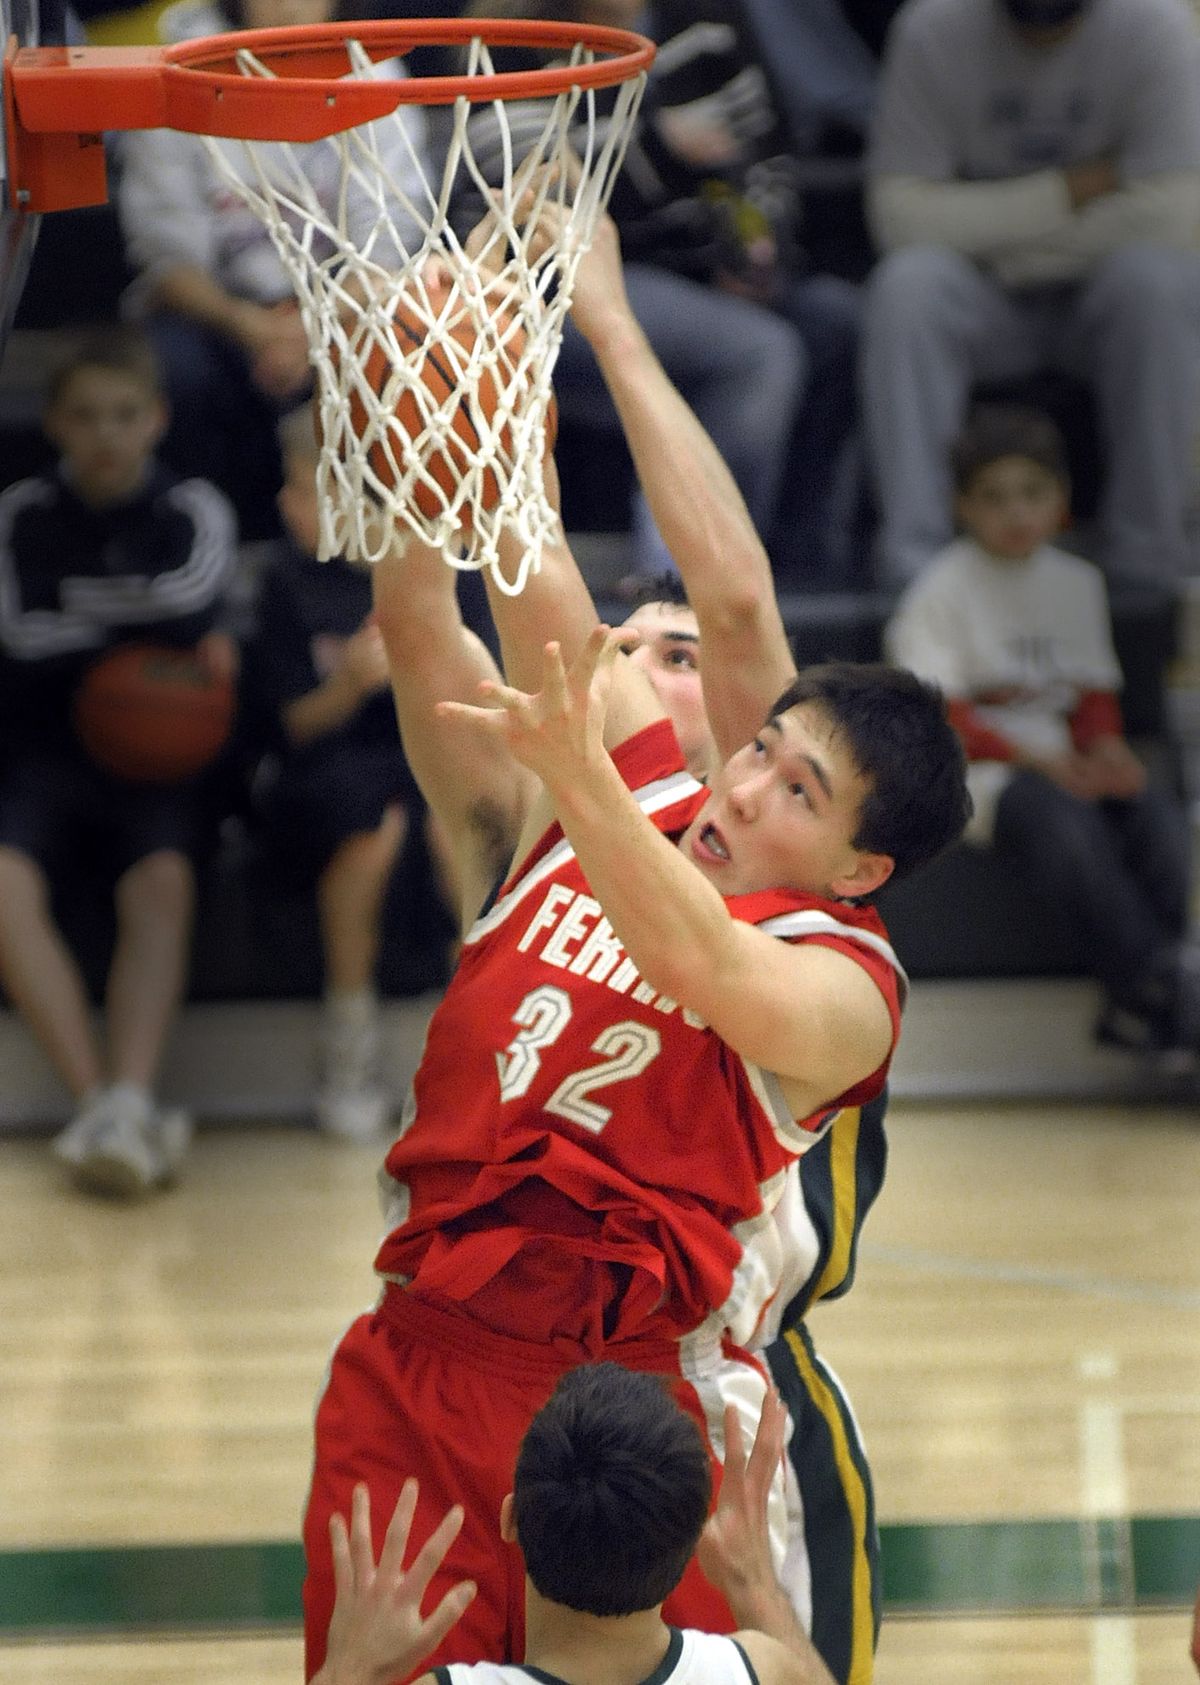 Taylor Kamitomo of Ferris crashes inside to control a defensive rebound against Shadle Park.  (CHRISTOPHER ANDERSON / The Spokesman-Review)